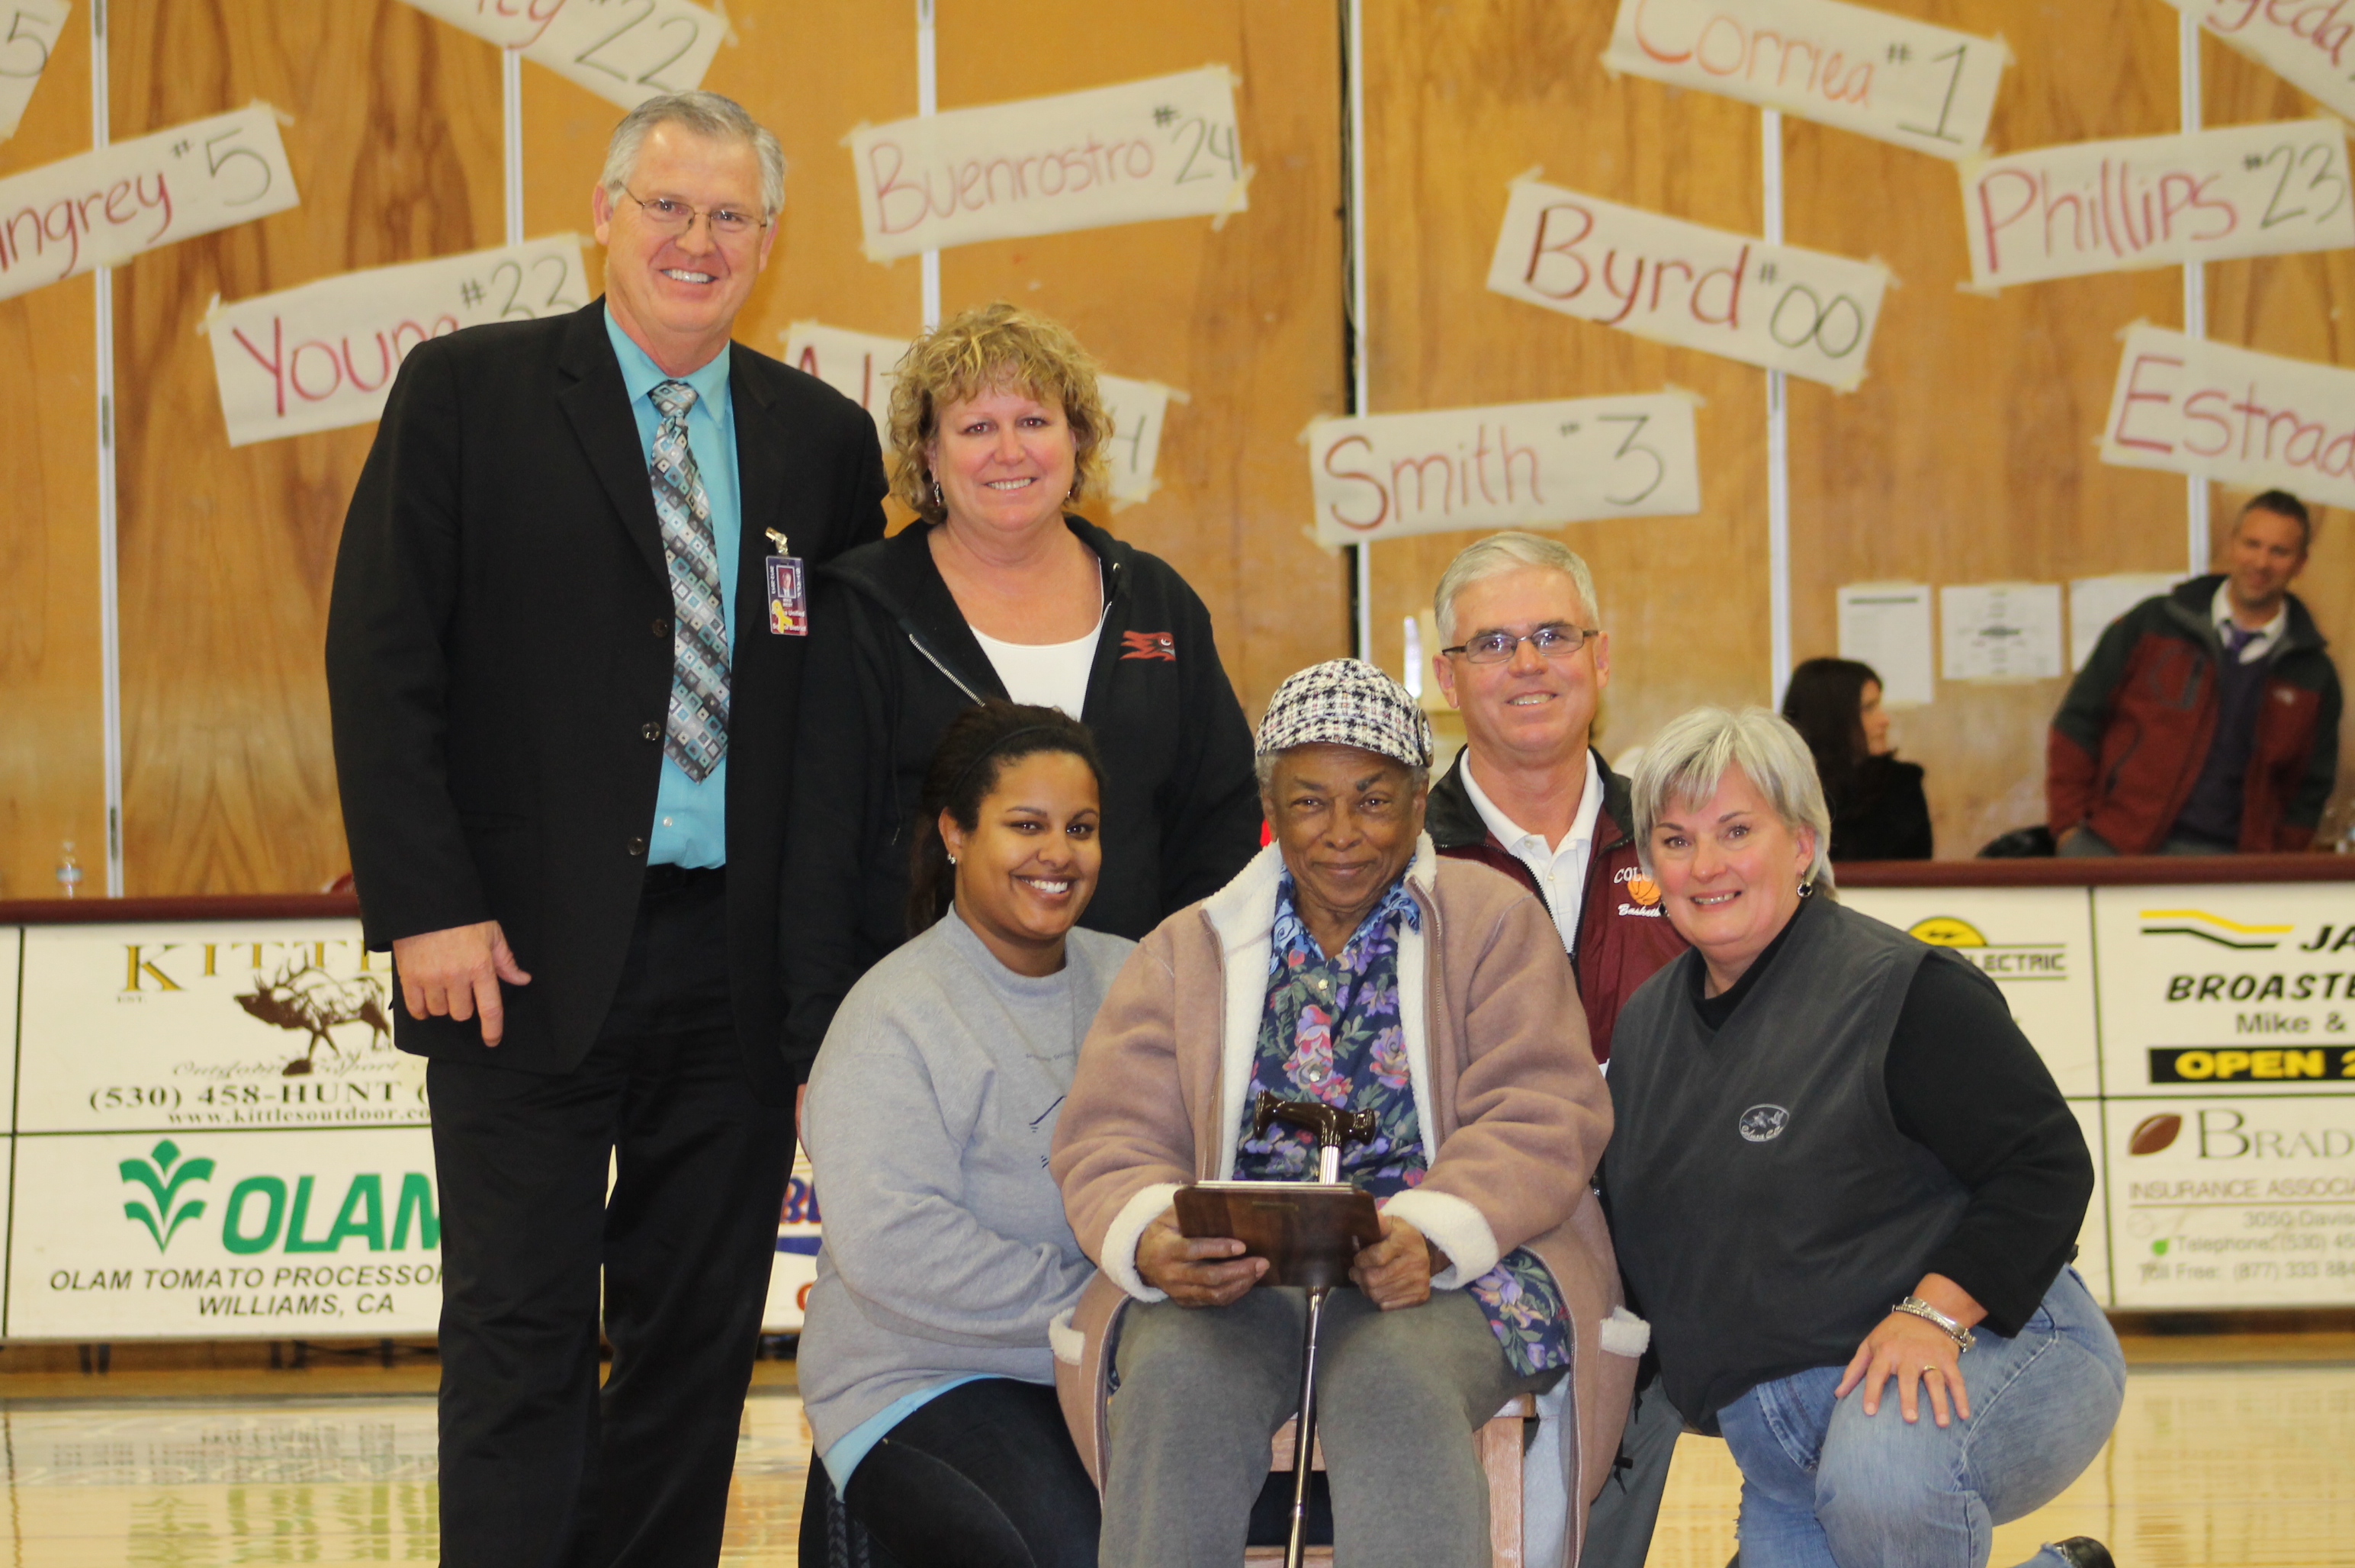 Juanita Roberts was nomitated by CRAF for her years of service to CHS